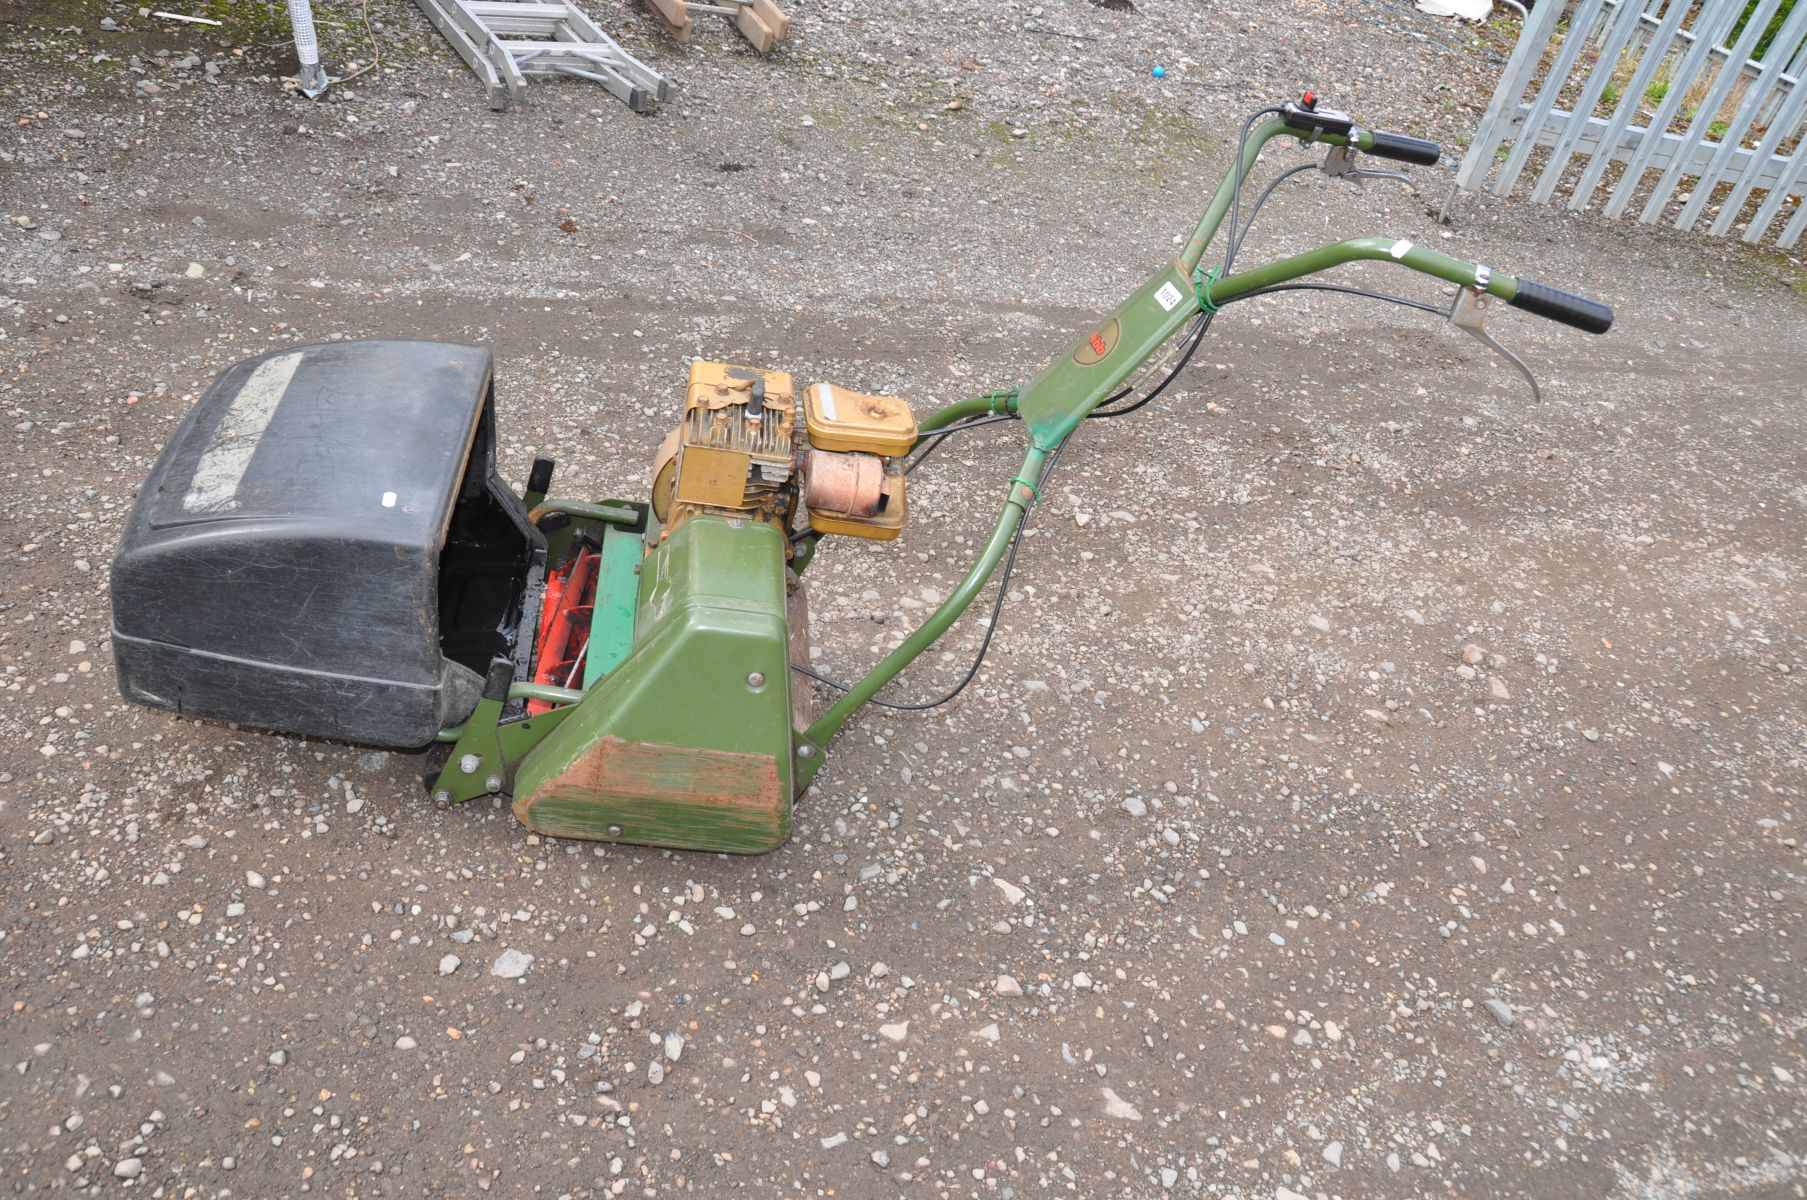 A VINTAGE WEBB AB1474 PETROL CYLINDER MOWER with a Briggs and Stratton 2 hp motor ( engine pulls